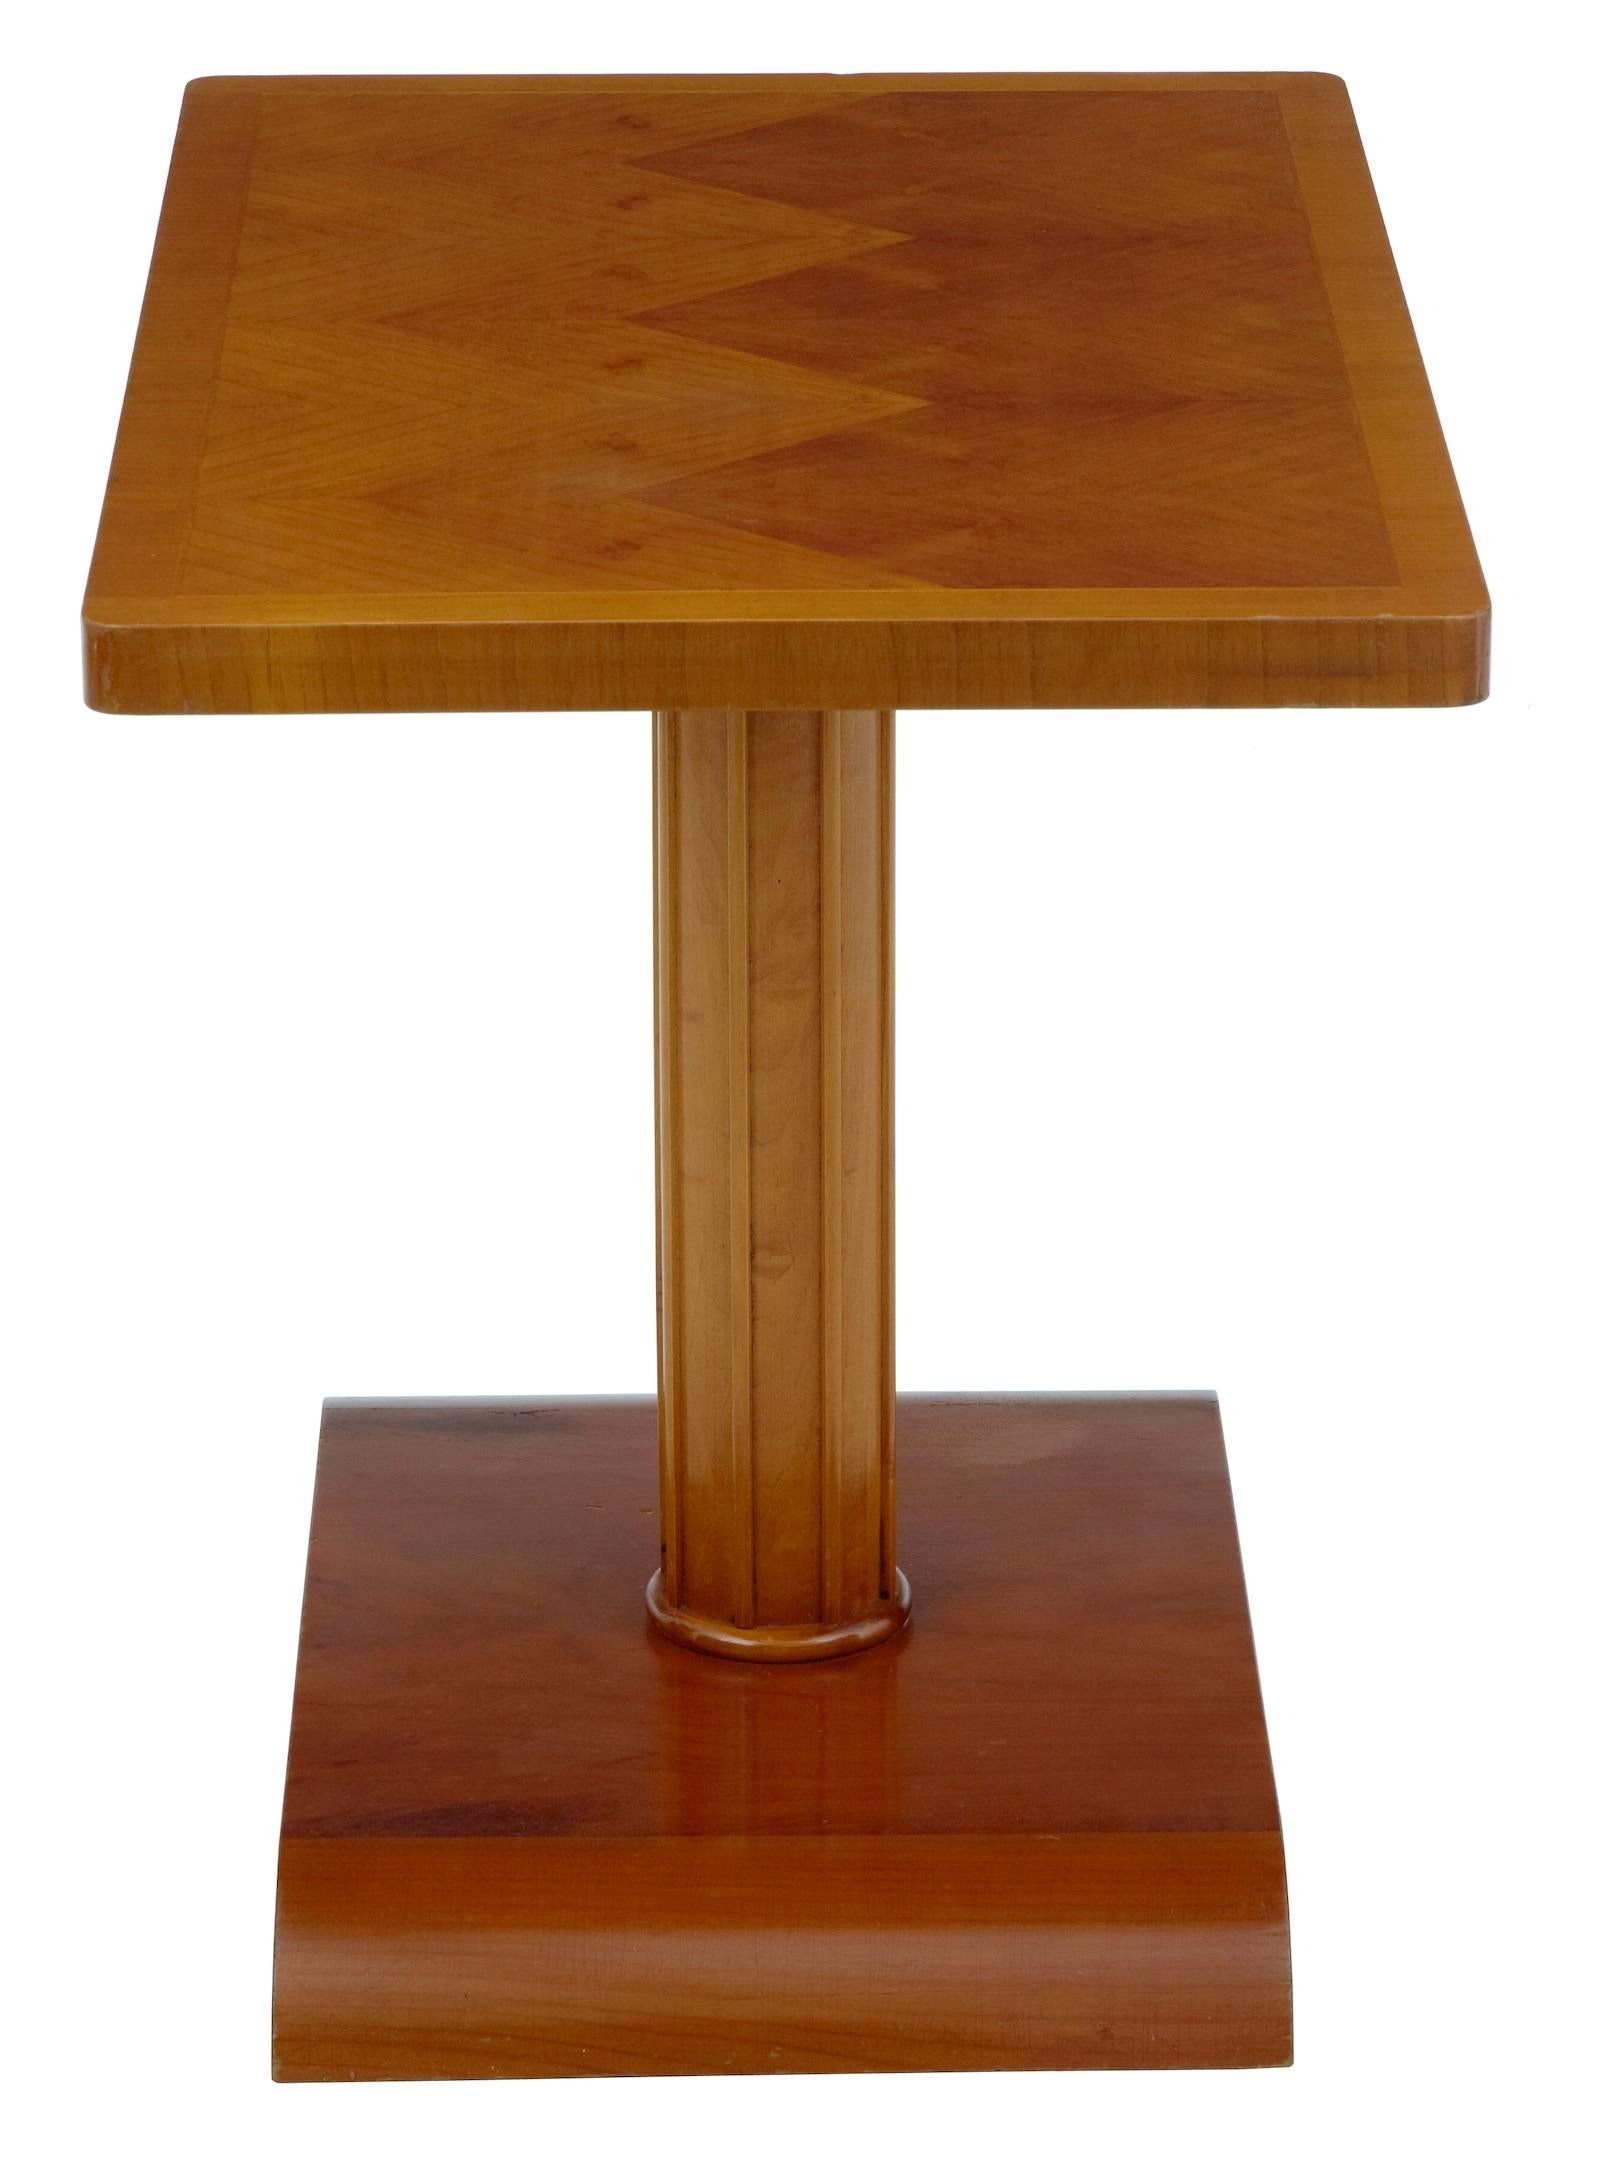 Rich colored birch occasional table, circa 1960.
Contrasting veneers to the top, standing on a fluted stem and shaped base.

One scratch and marks to top. Cracking to polish.

Measures: Height 22 3/4